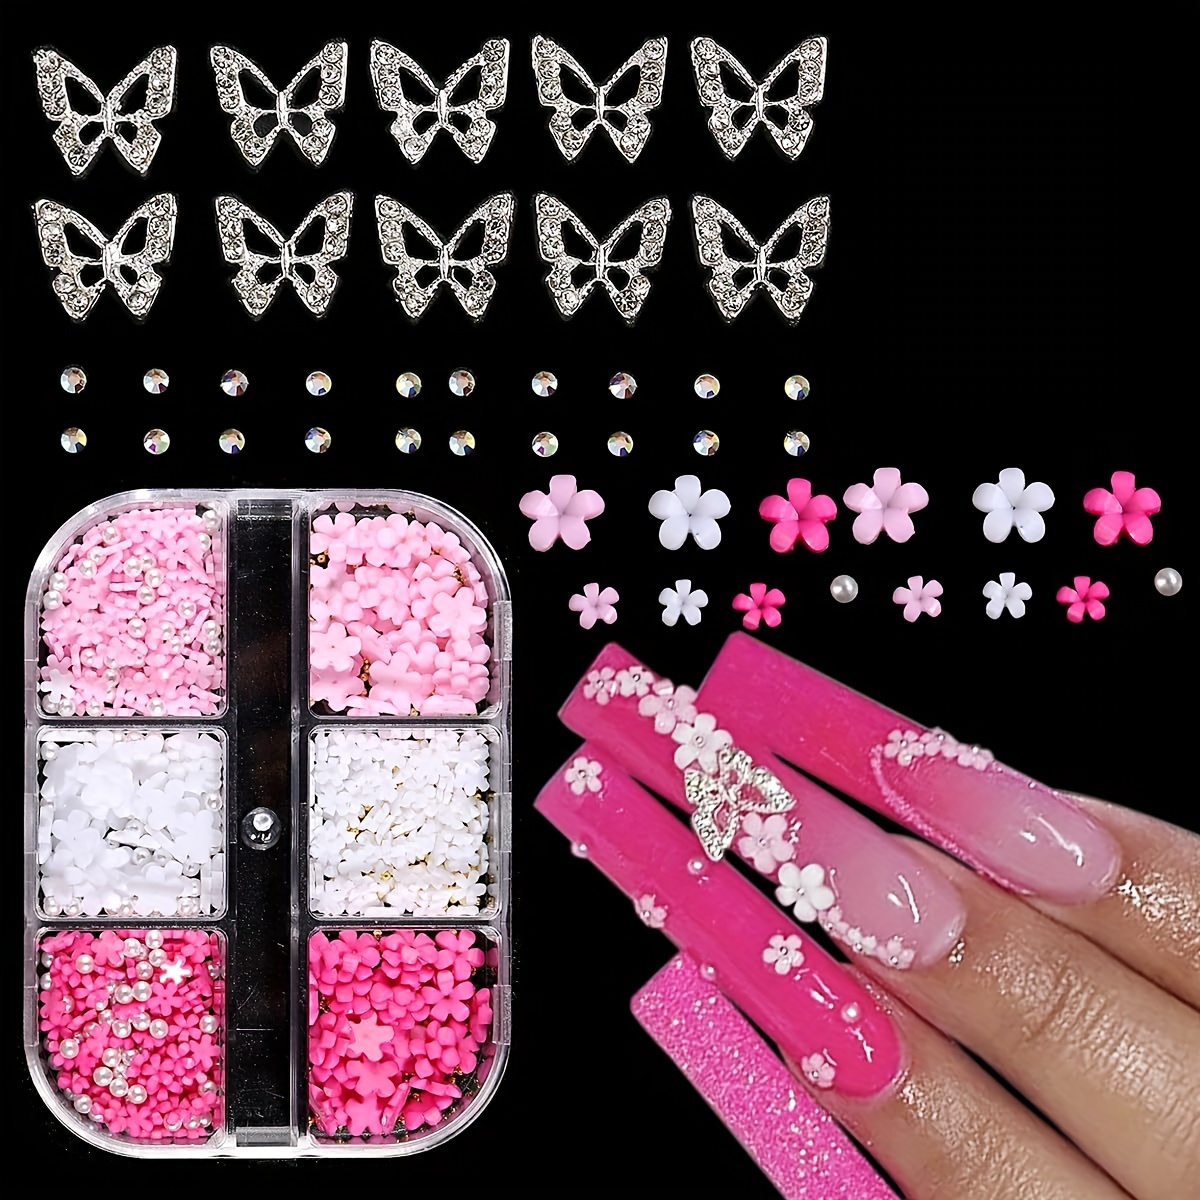 

3d Acrylic Flowers For Nails, Metal Butterfly Charms, And Ab Color Gemstones - Y2k Nail Art Accessories Kit